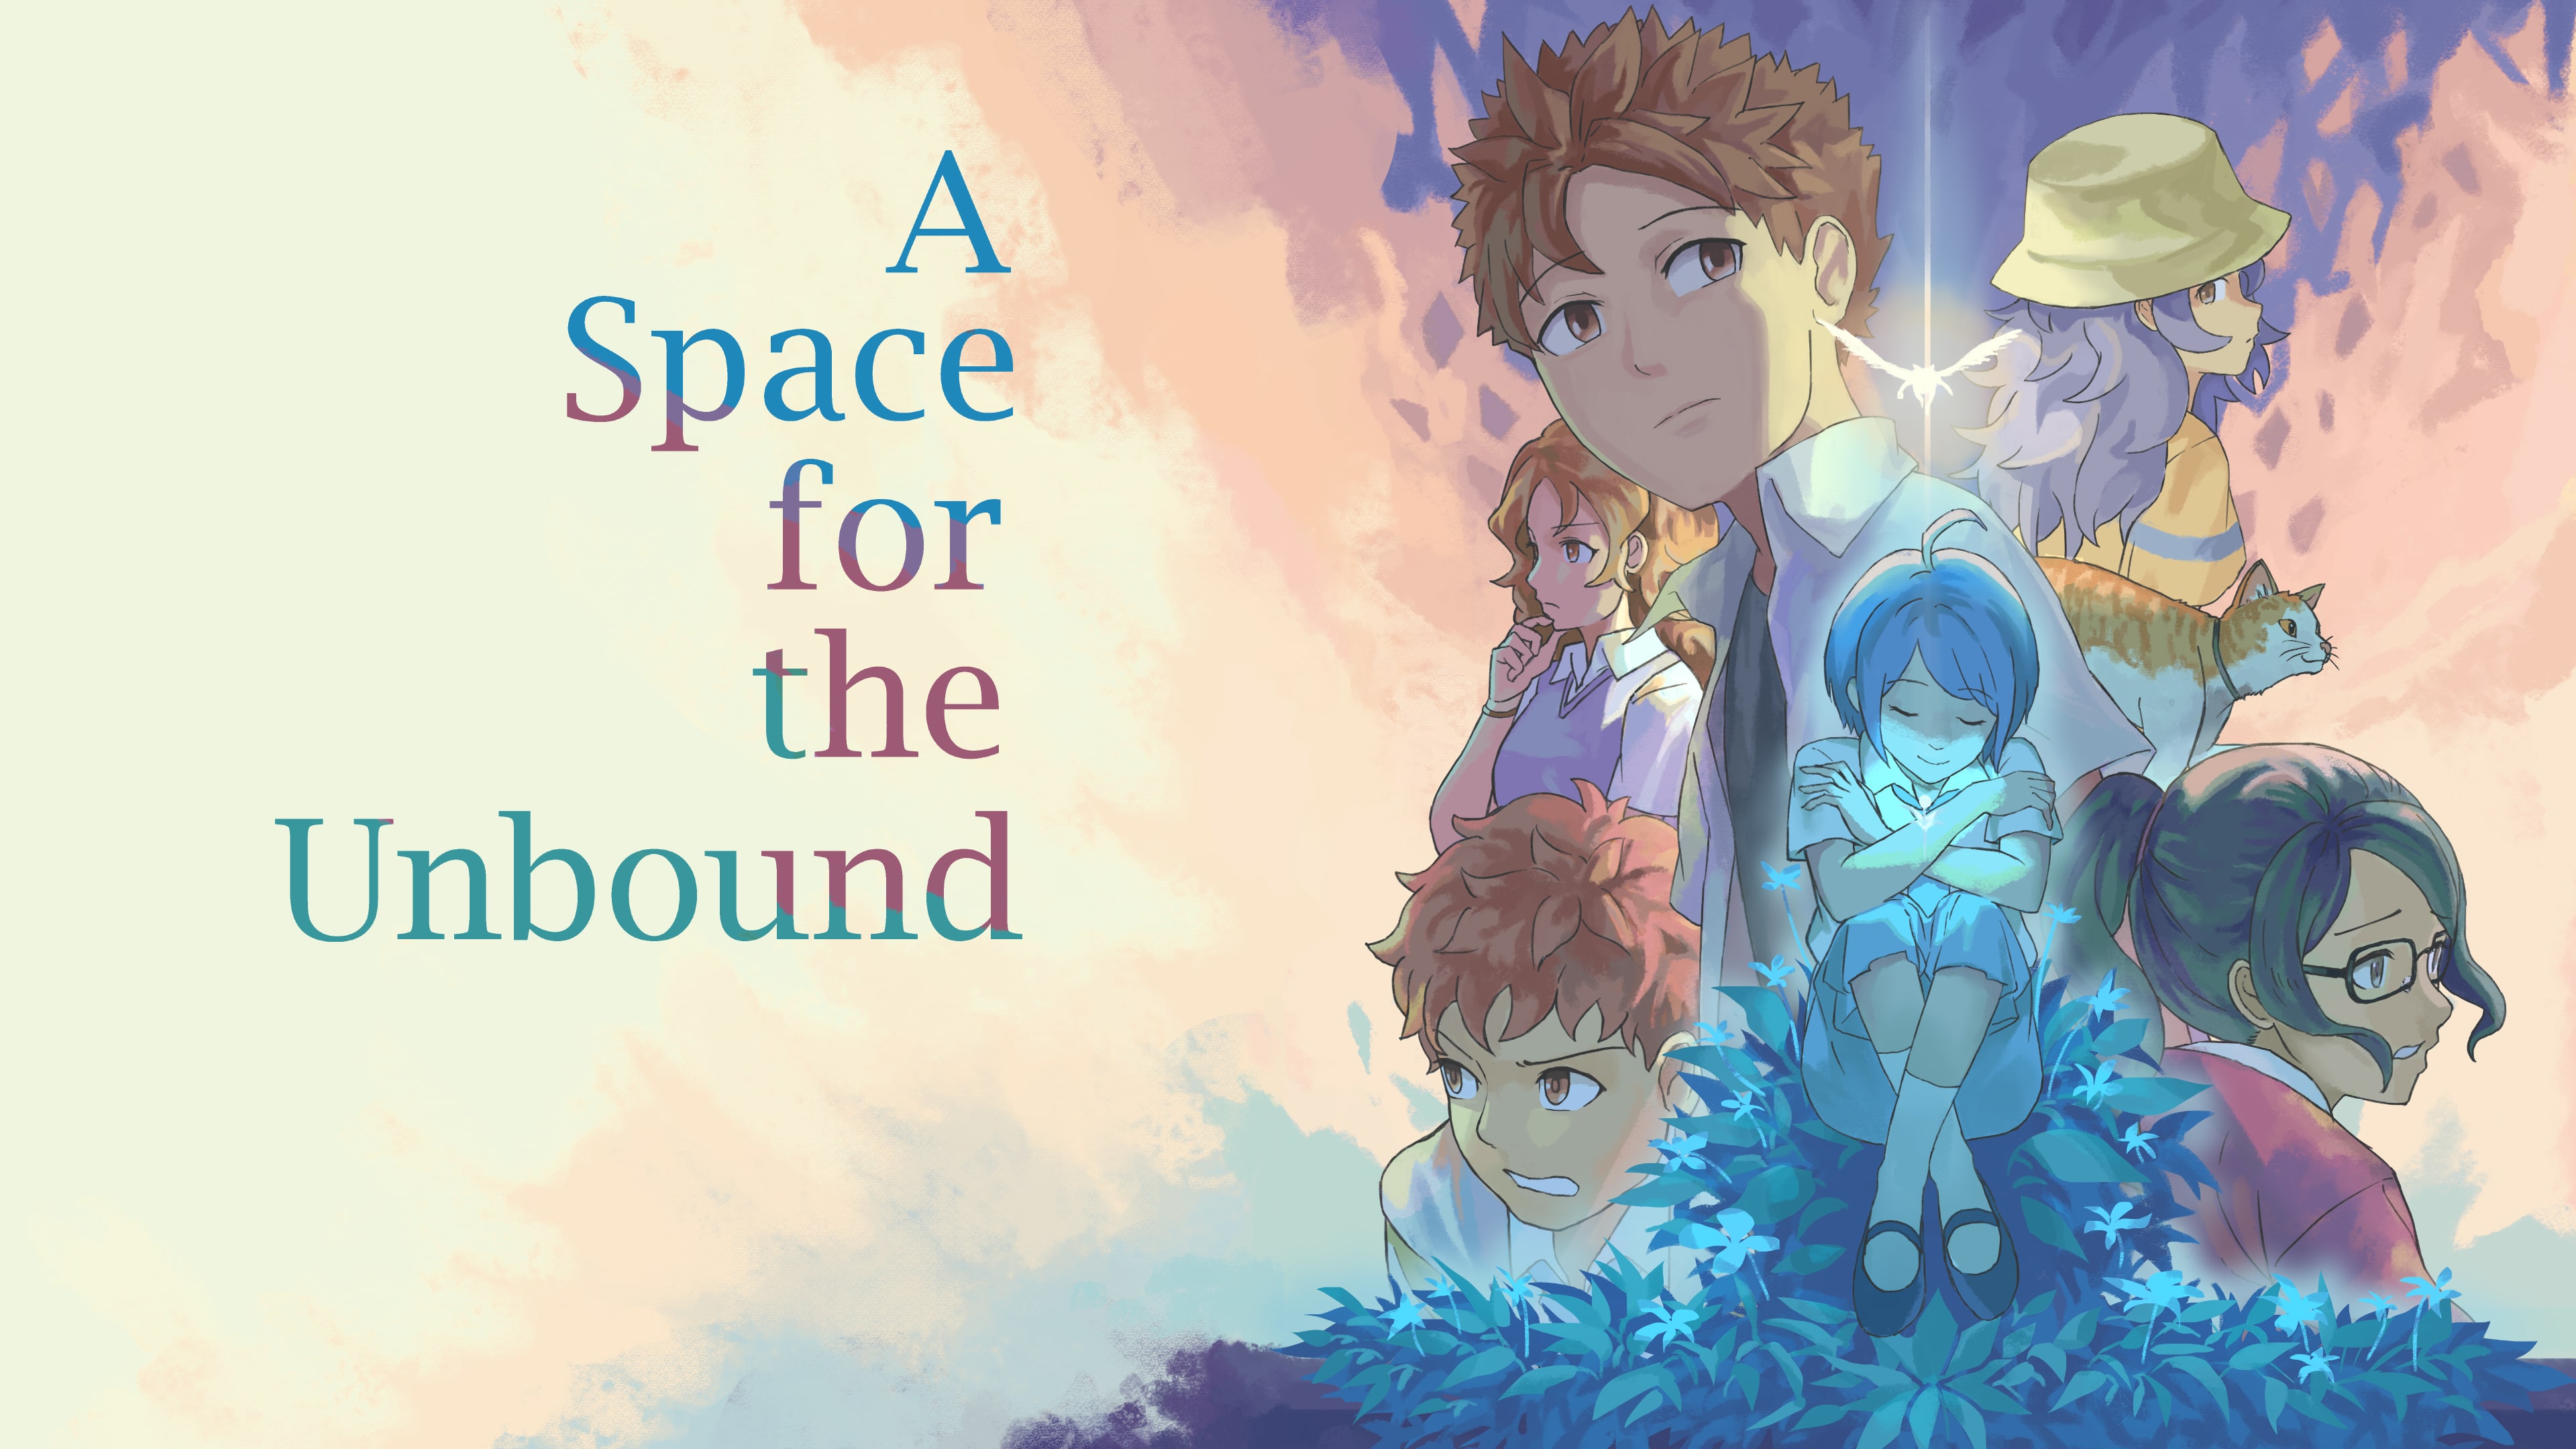 A Space for the Unbound (Simplified Chinese, English, Korean, Japanese, Traditional Chinese)